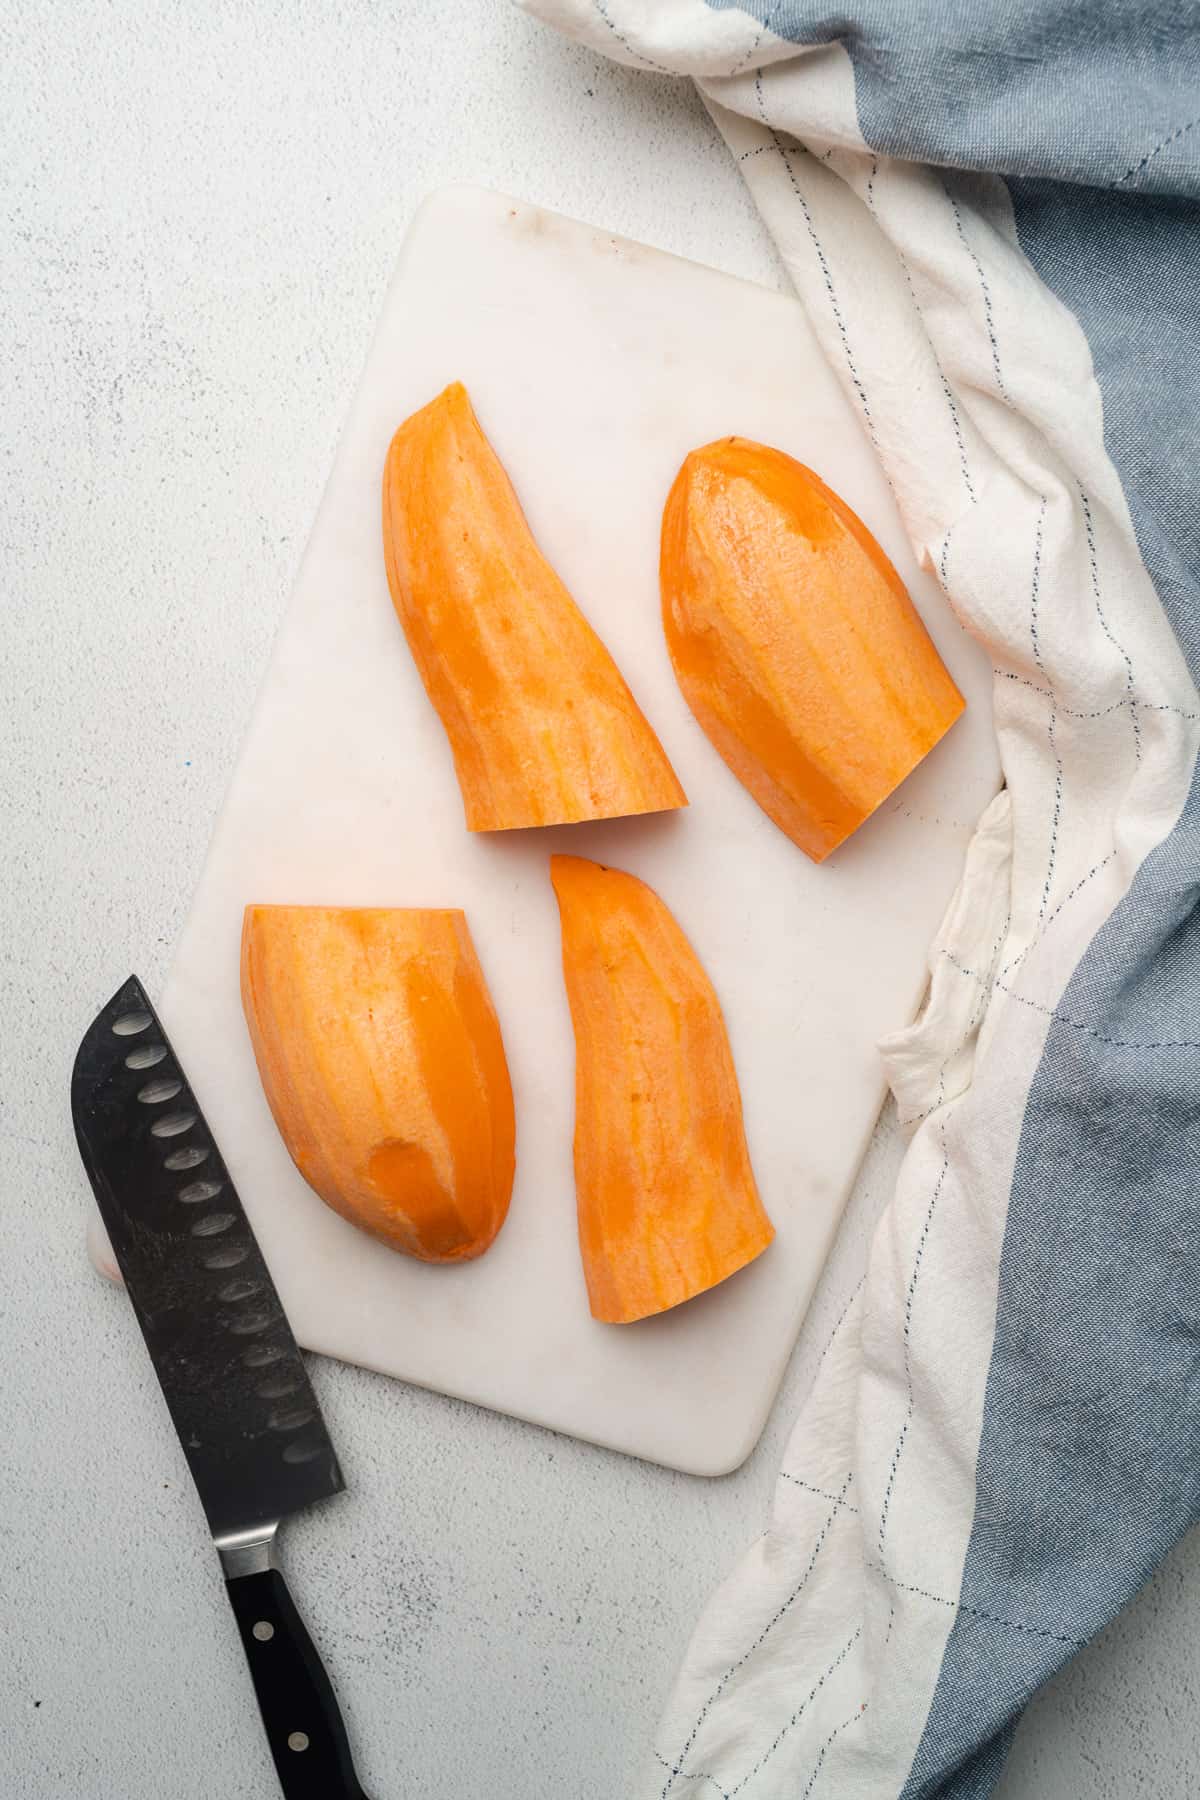 sweet potato cut into 4 pieces on a cutting board with a sharp knife nearby